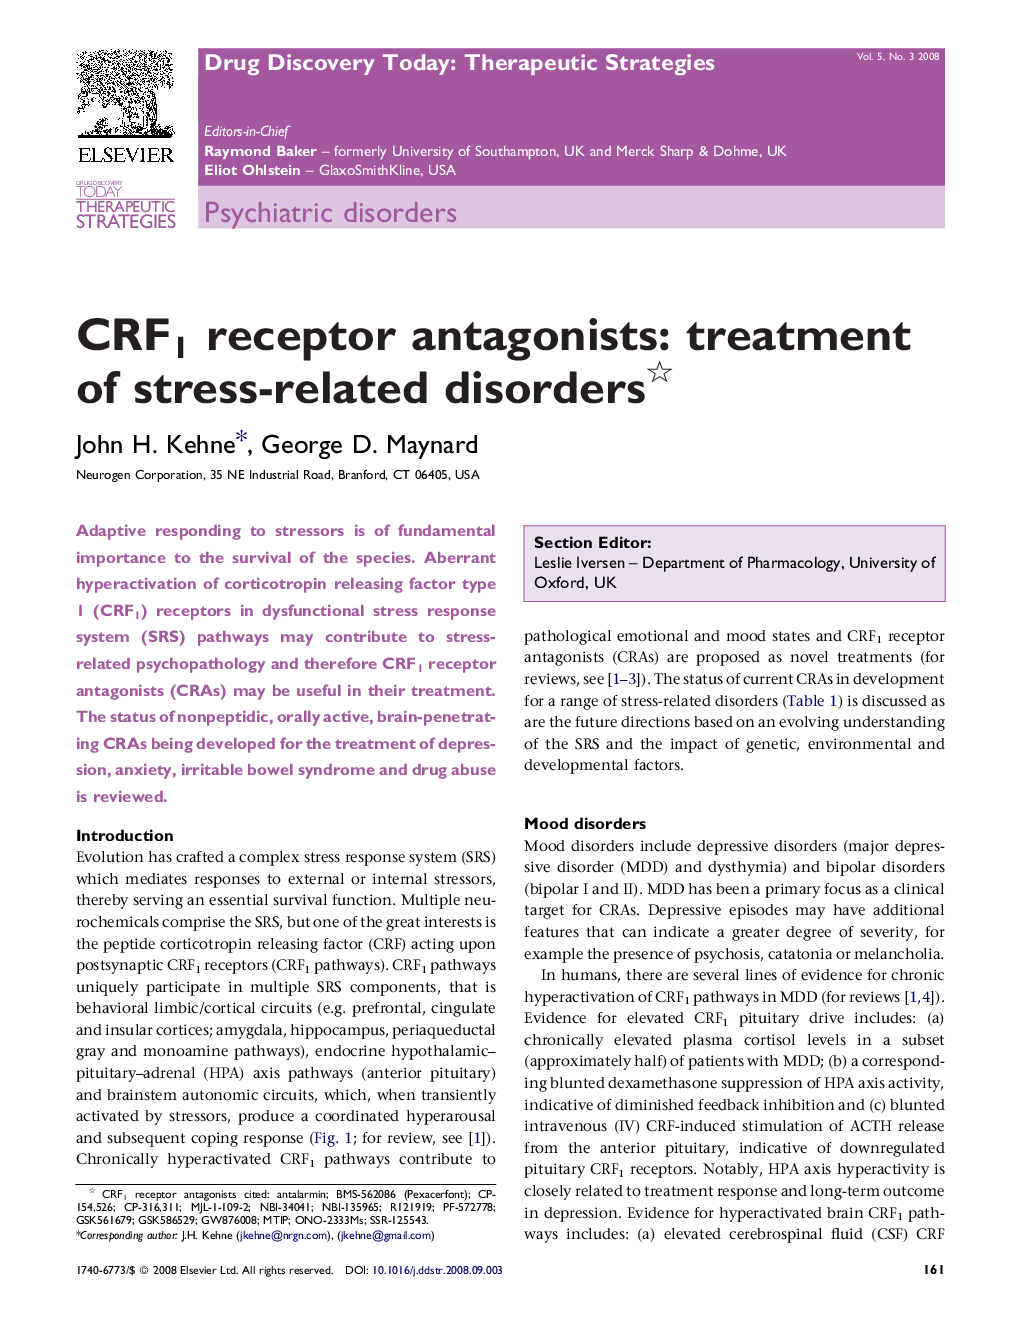 CRF1 receptor antagonists: treatment of stress-related disorders 